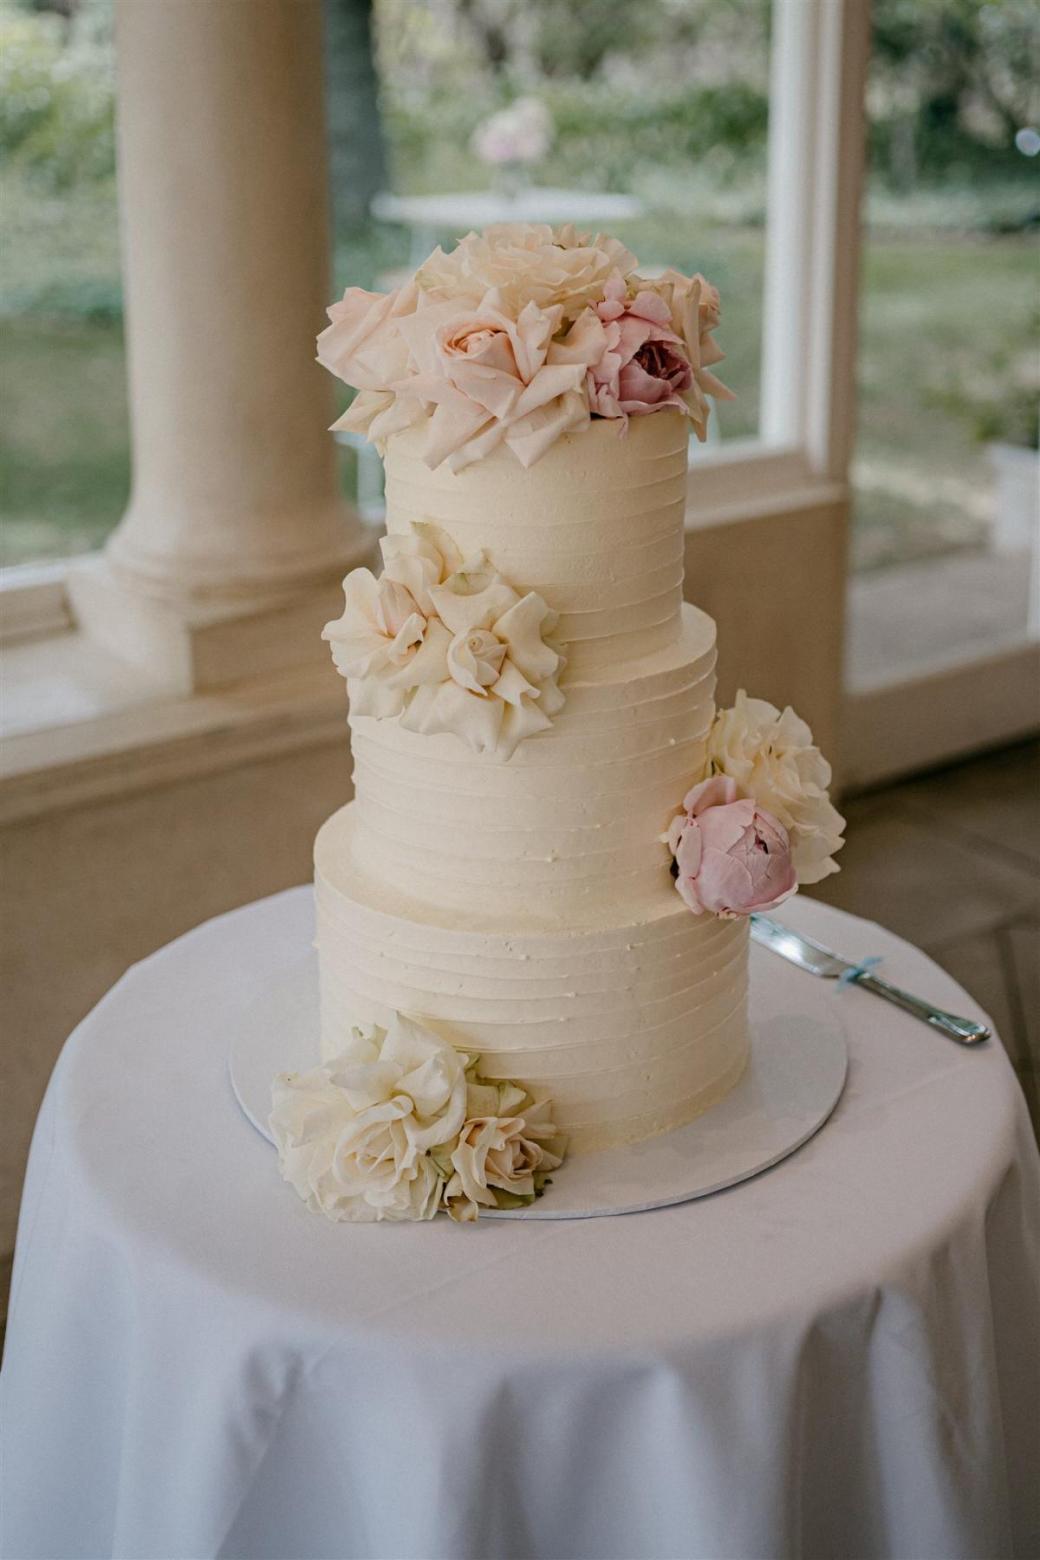 KWH bride Ashleigh's cream wedding cake, featuring a rose floral detail.